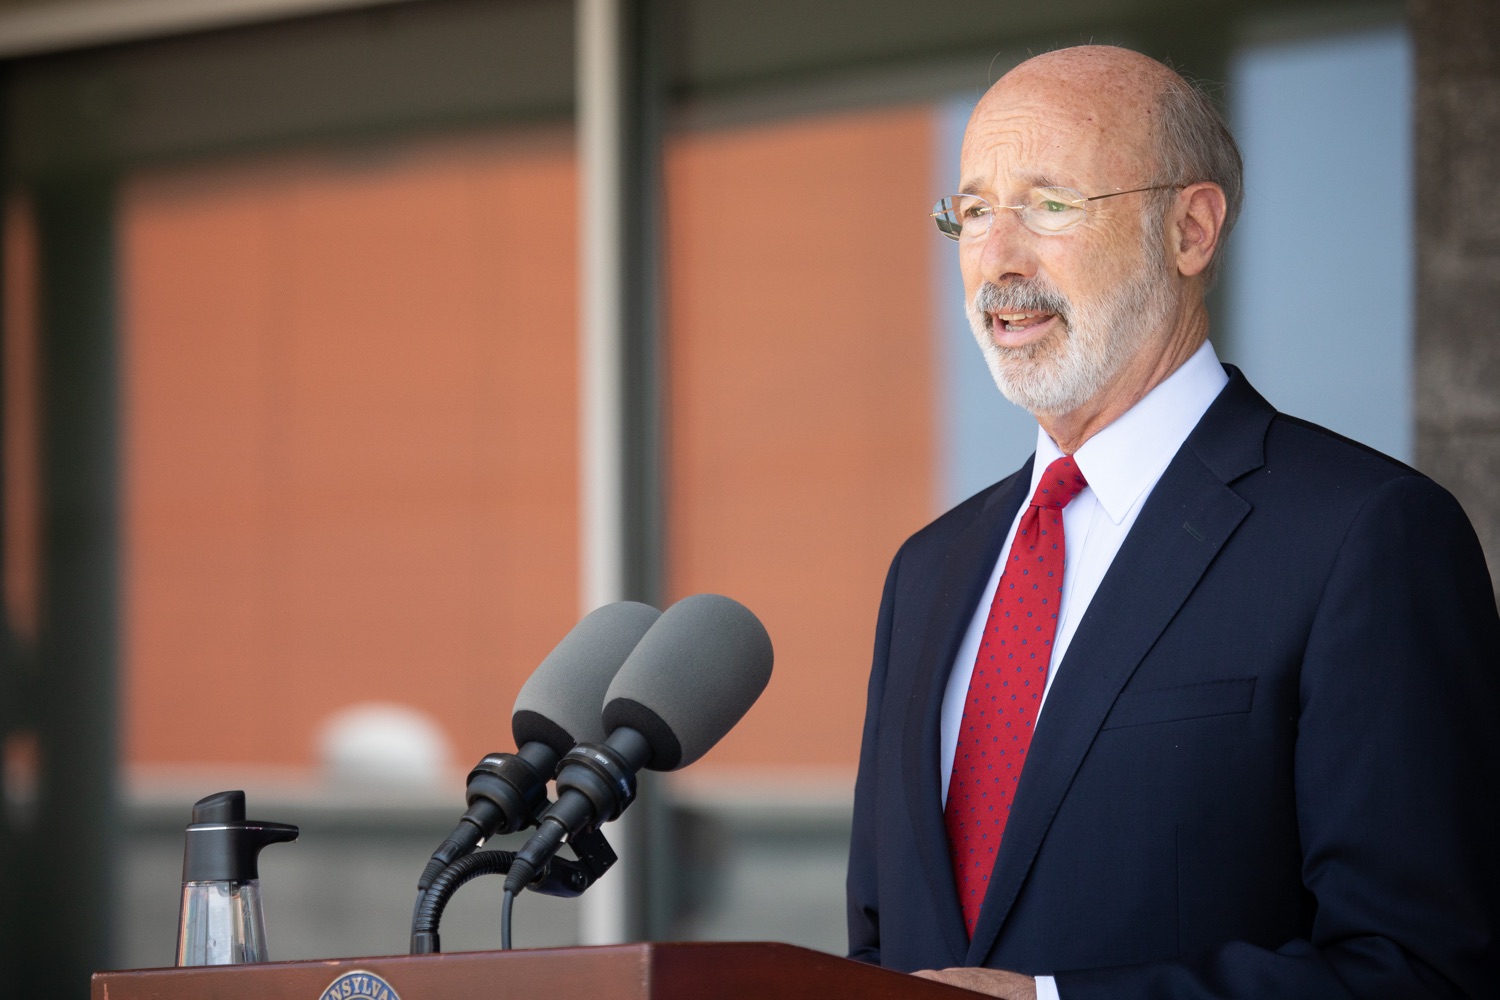 Pennsylvania Governor Tom Wolf speaking with the press.  Governor Tom Wolf visited the child care center at PSECU headquarters in Harrisburg today to announce $53 million in additional financial support for child care providers that have suffered during COVID-19.  Harrisburg, PA  July 6, 2020..<br><a href="https://filesource.amperwave.net/commonwealthofpa/photo/18143_gov_cares_dz_12.jpg" target="_blank">⇣ Download Photo</a>